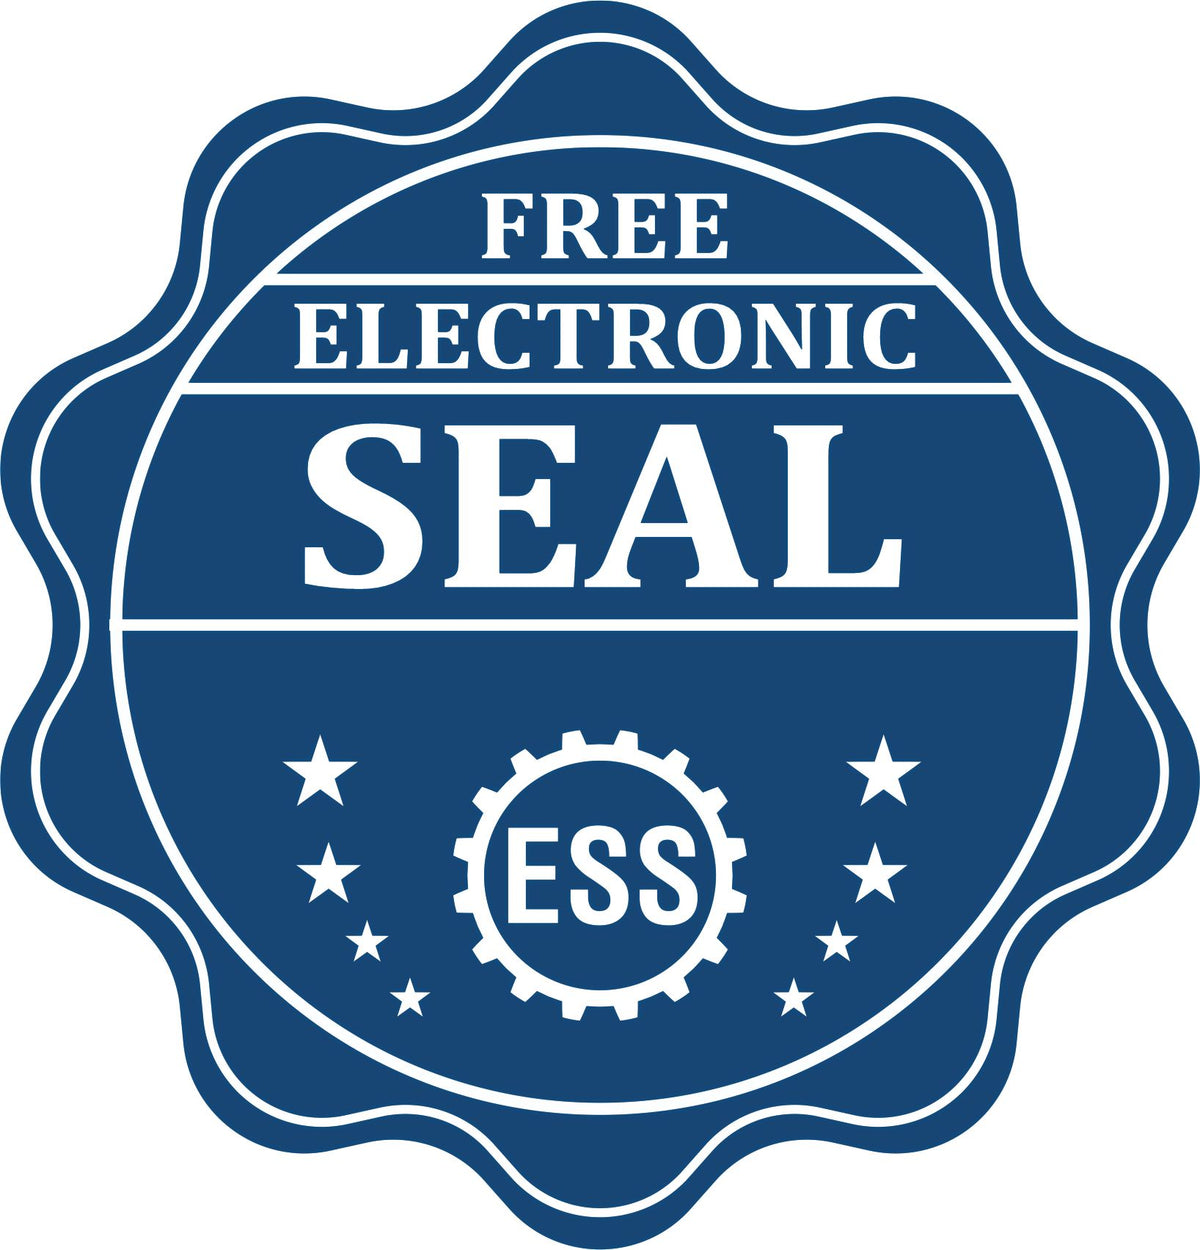 A badge showing a free electronic seal for the PSI South Carolina Notary Stamp with stars and the ESS gear on the emblem.